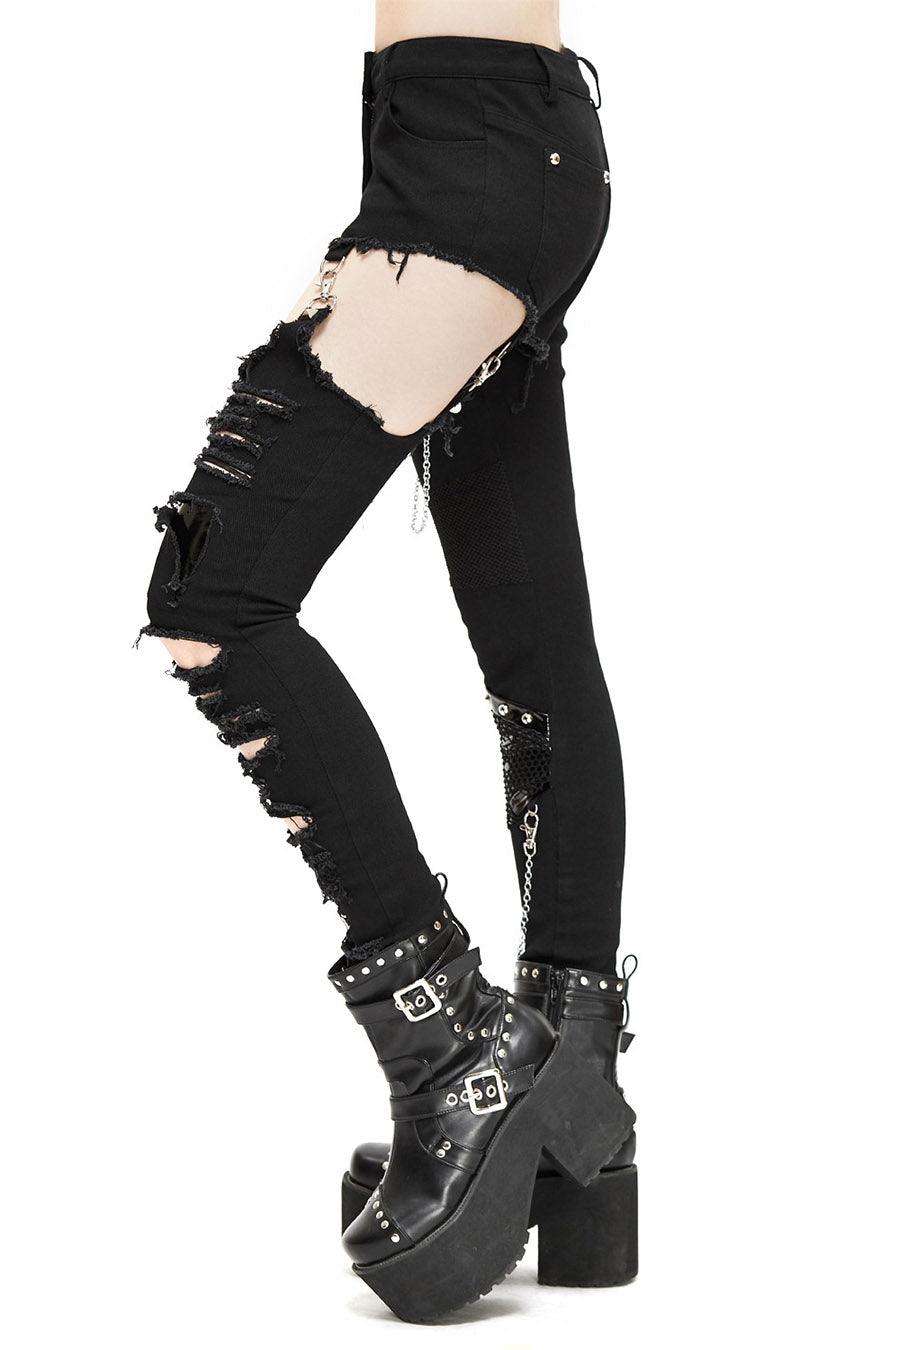 Devil Fashion Cryptling Cut-Out Pants - VampireFreaks